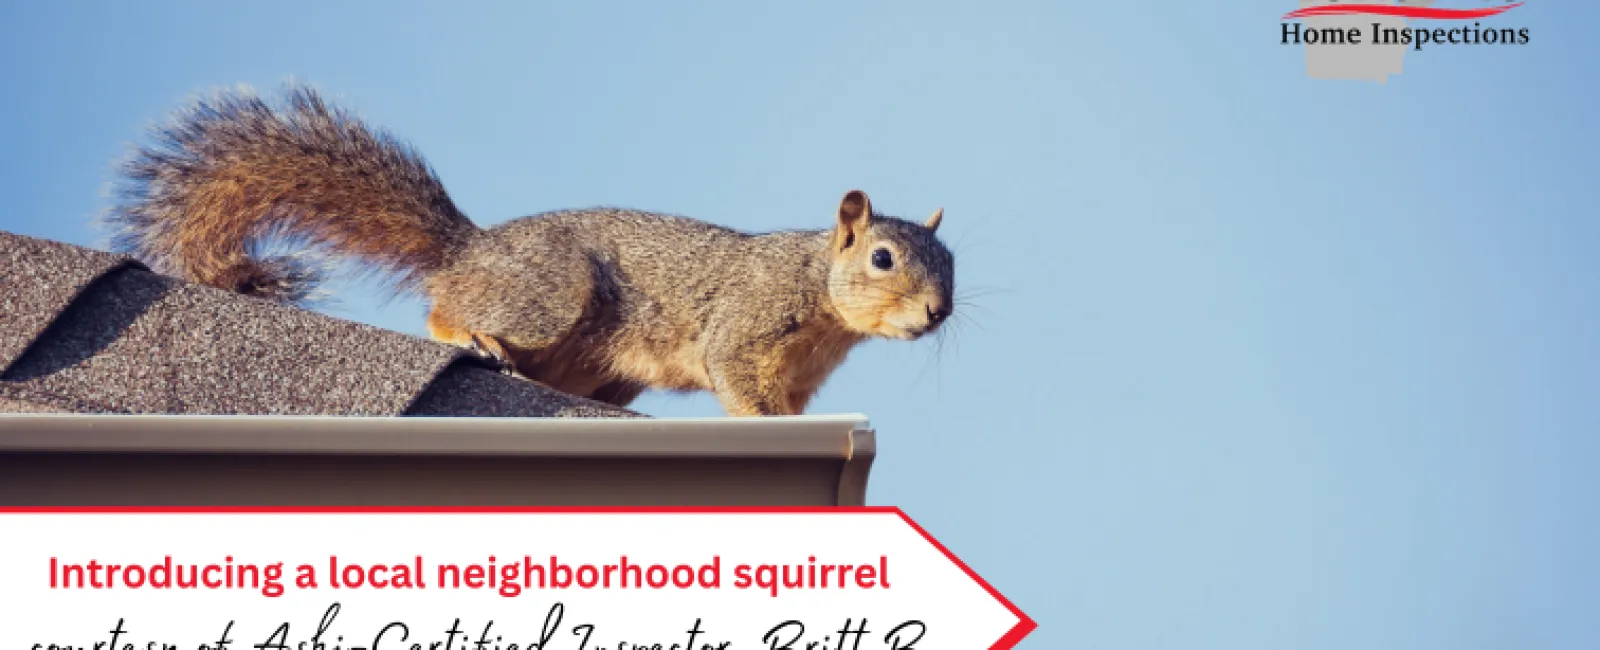 Introducing a local neighborhood squirrel courtesy of Ashi-Certified Inspector